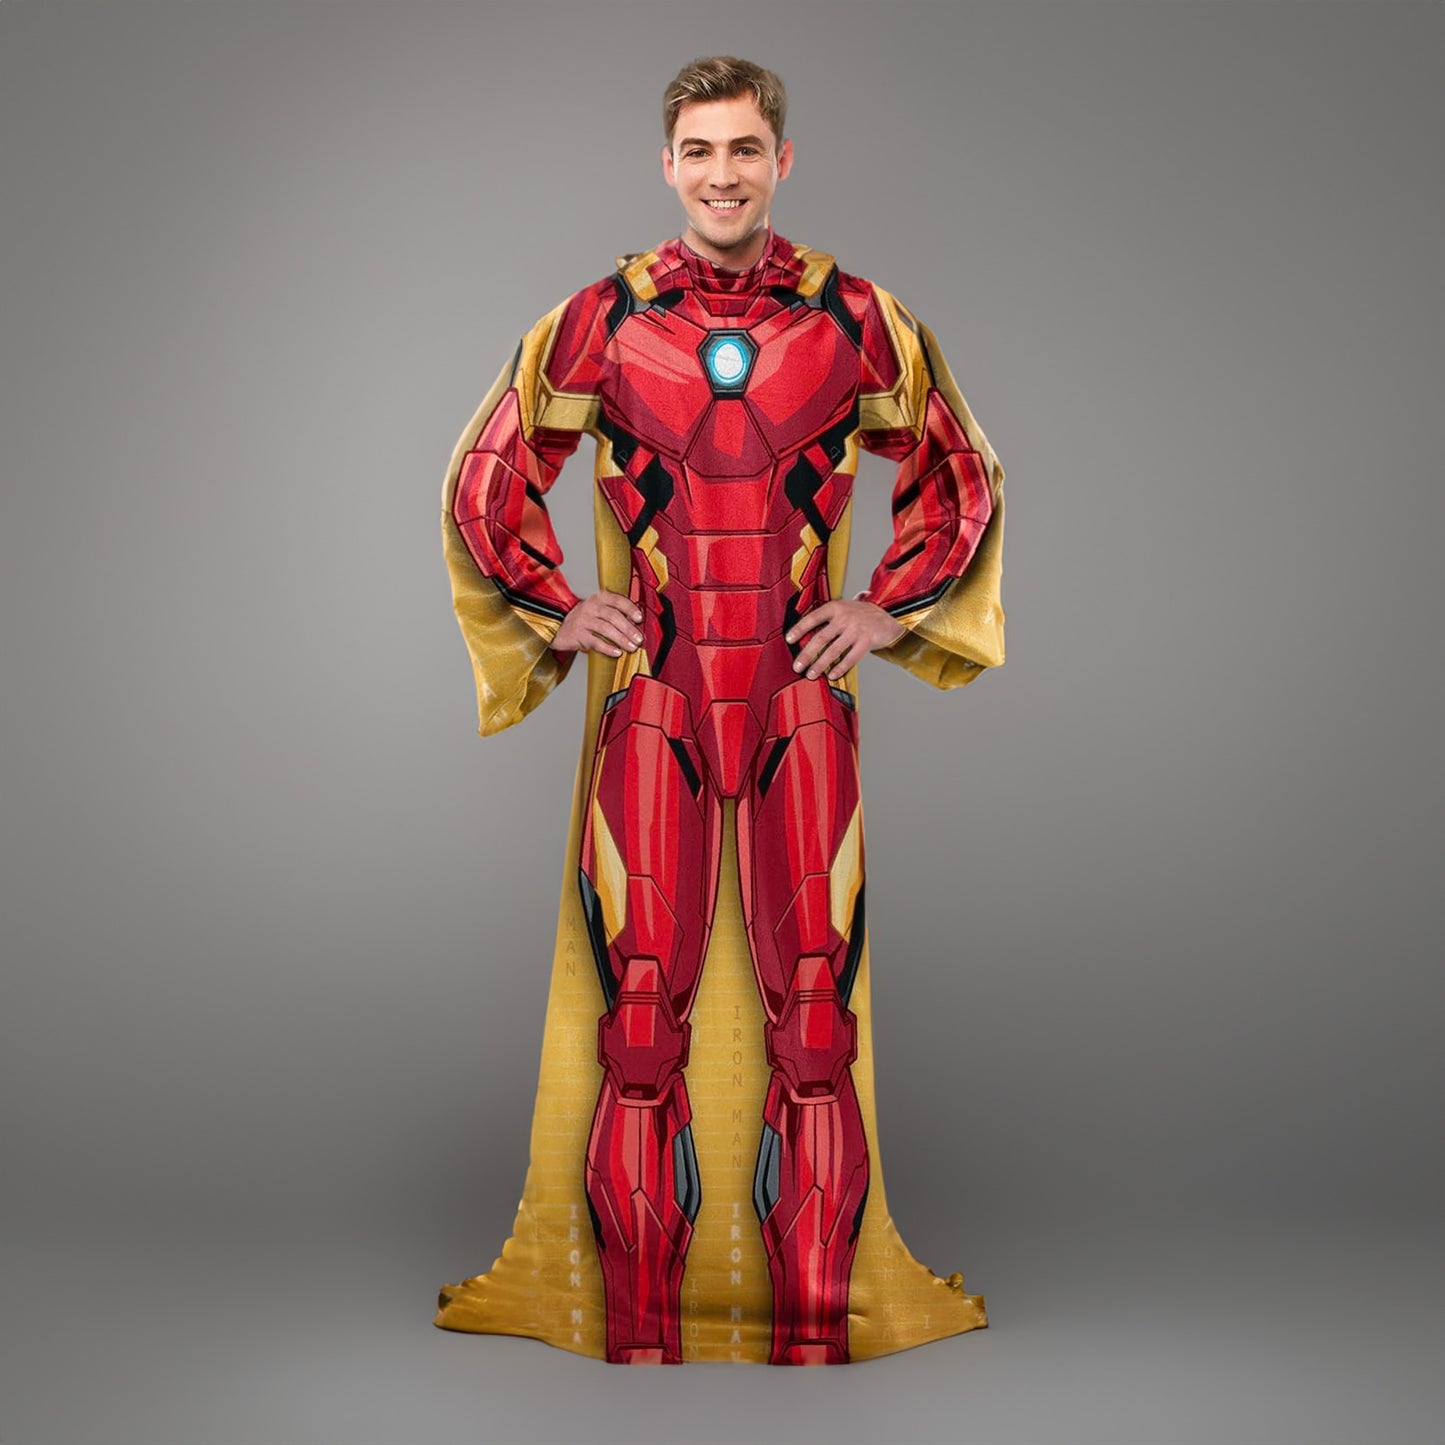 Iron Man (Marvel) Avengers Wearable Blanket With Sleeves